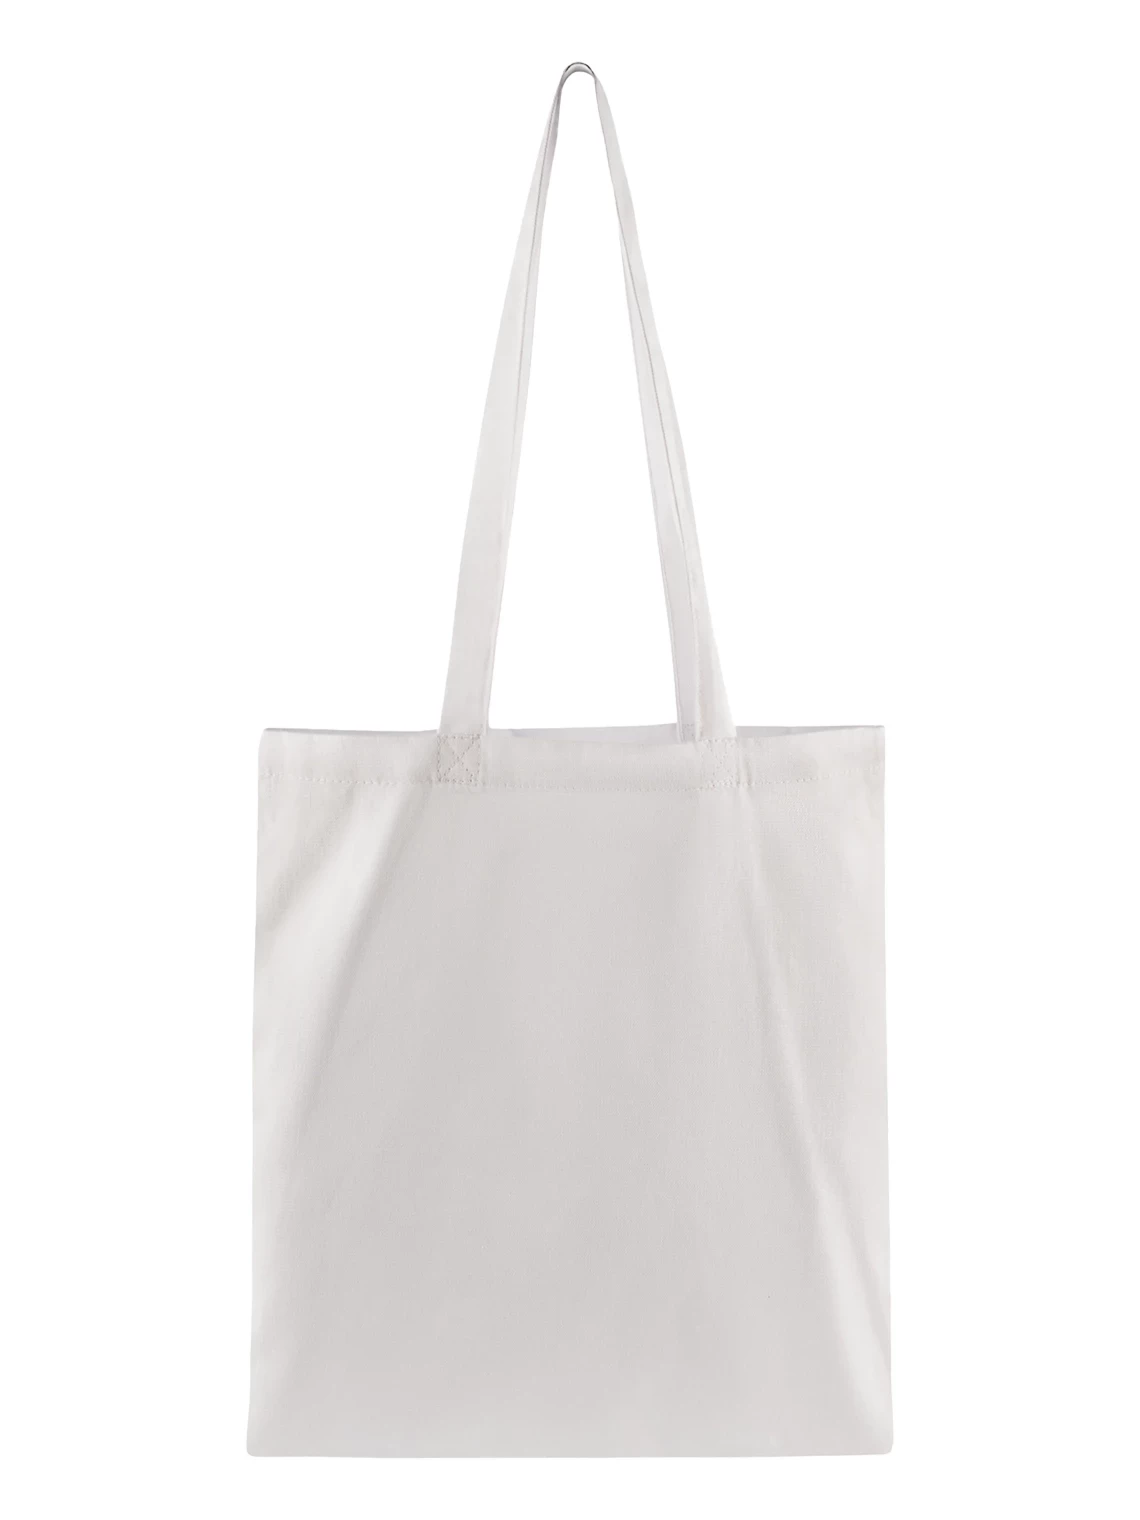 Cotton bag with print natural 140g